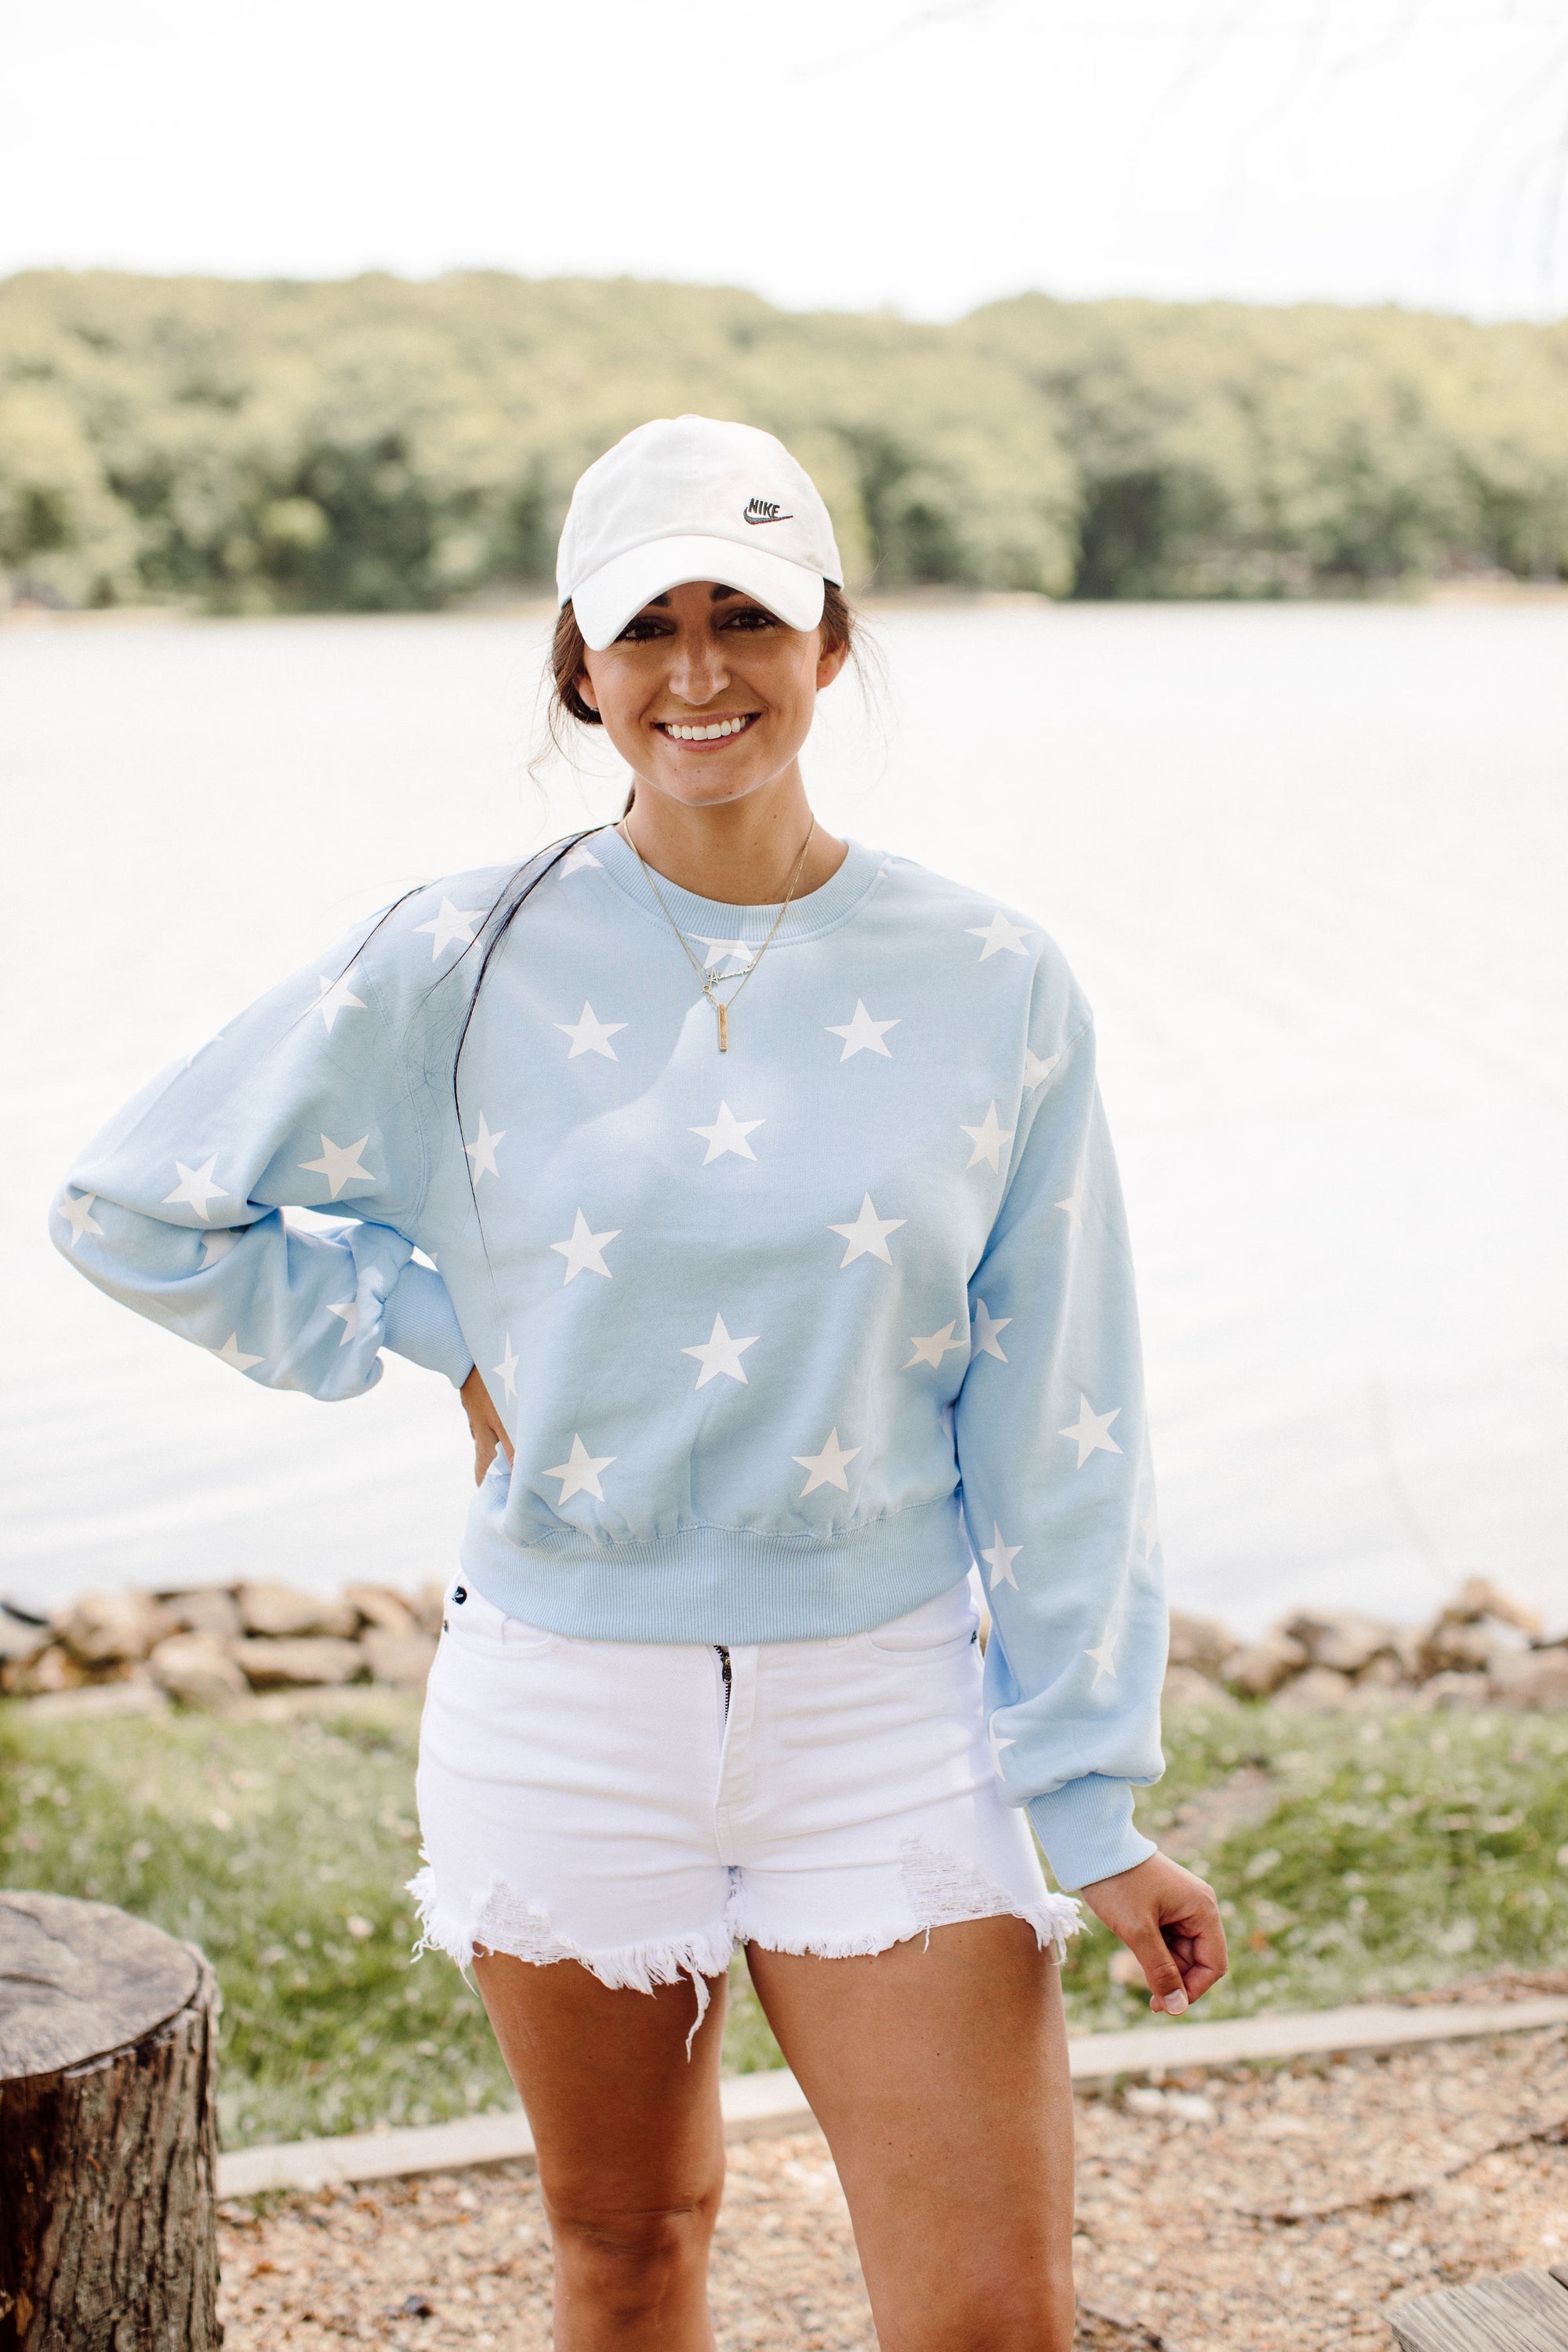 Committed to You Light Blue Crewneck Sweatshirt.